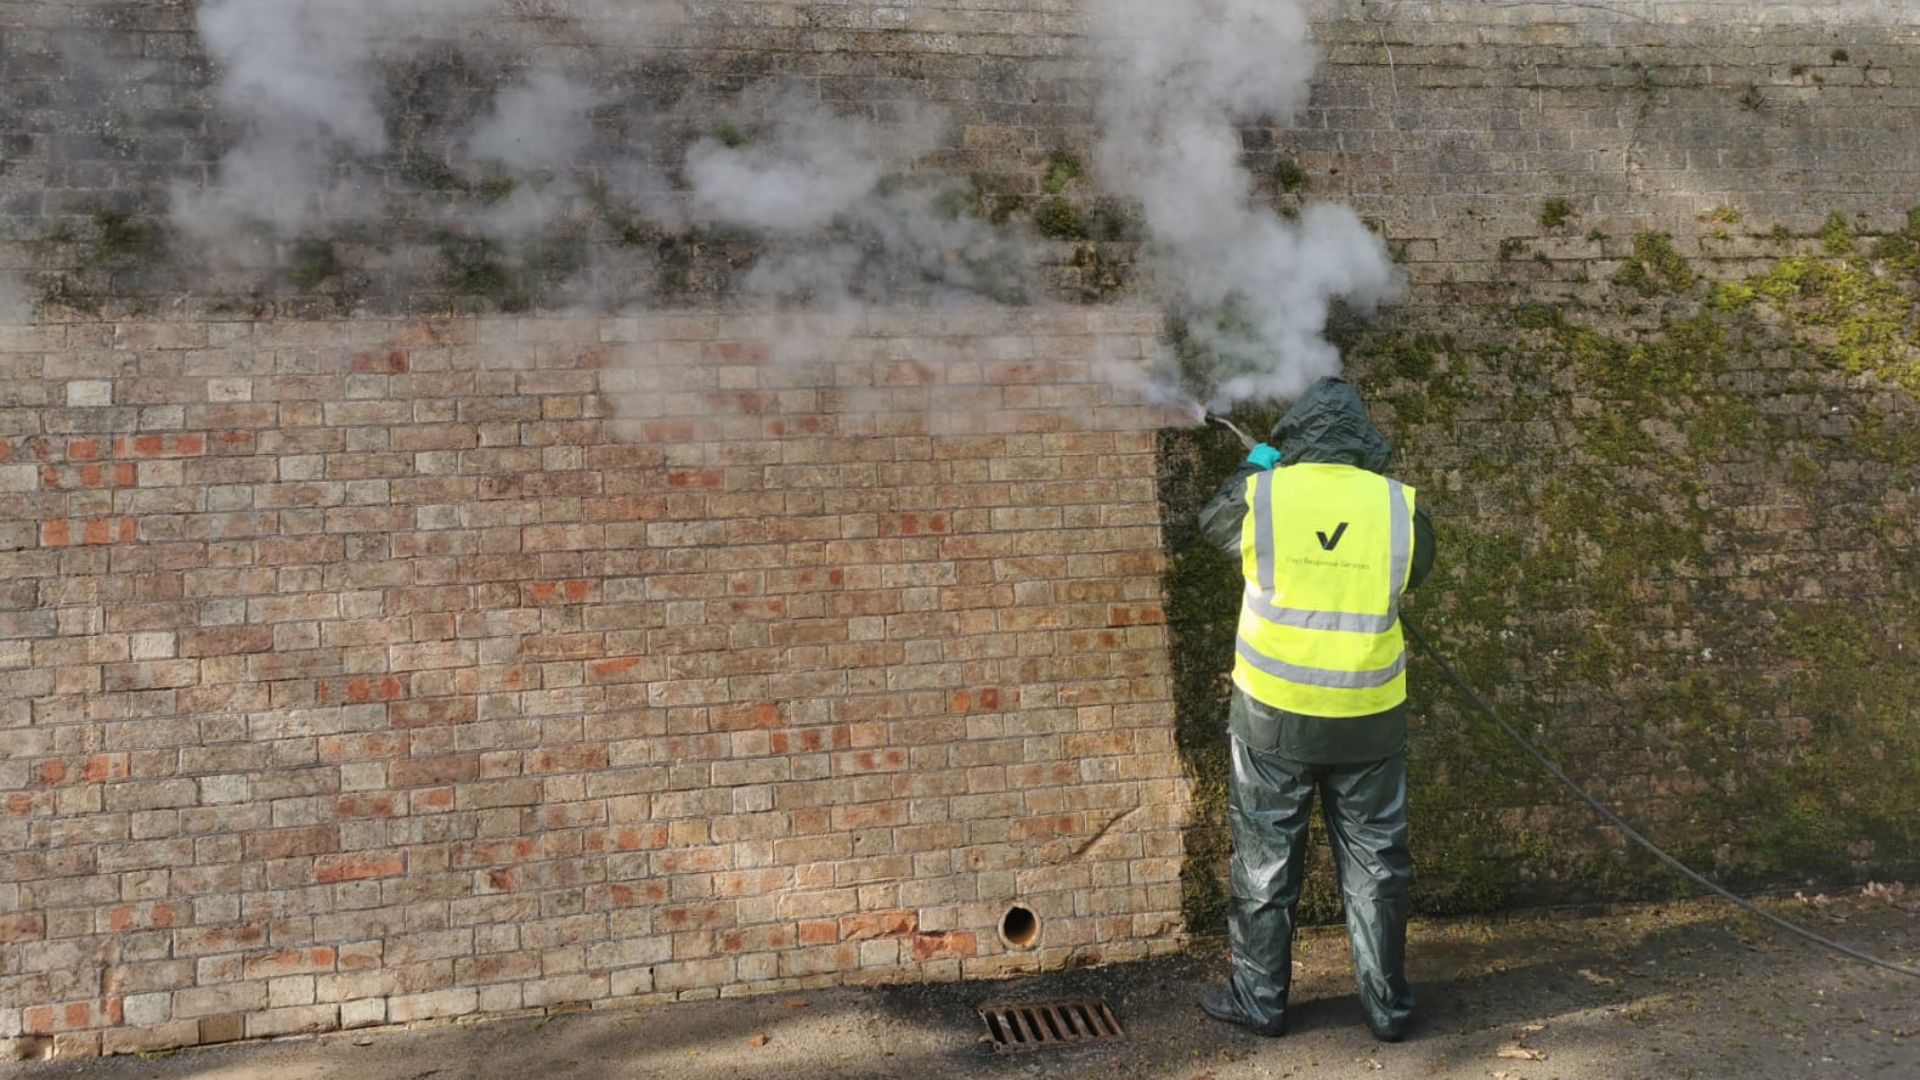 A man in a high visibility jacket continuing to clean a brick wall.